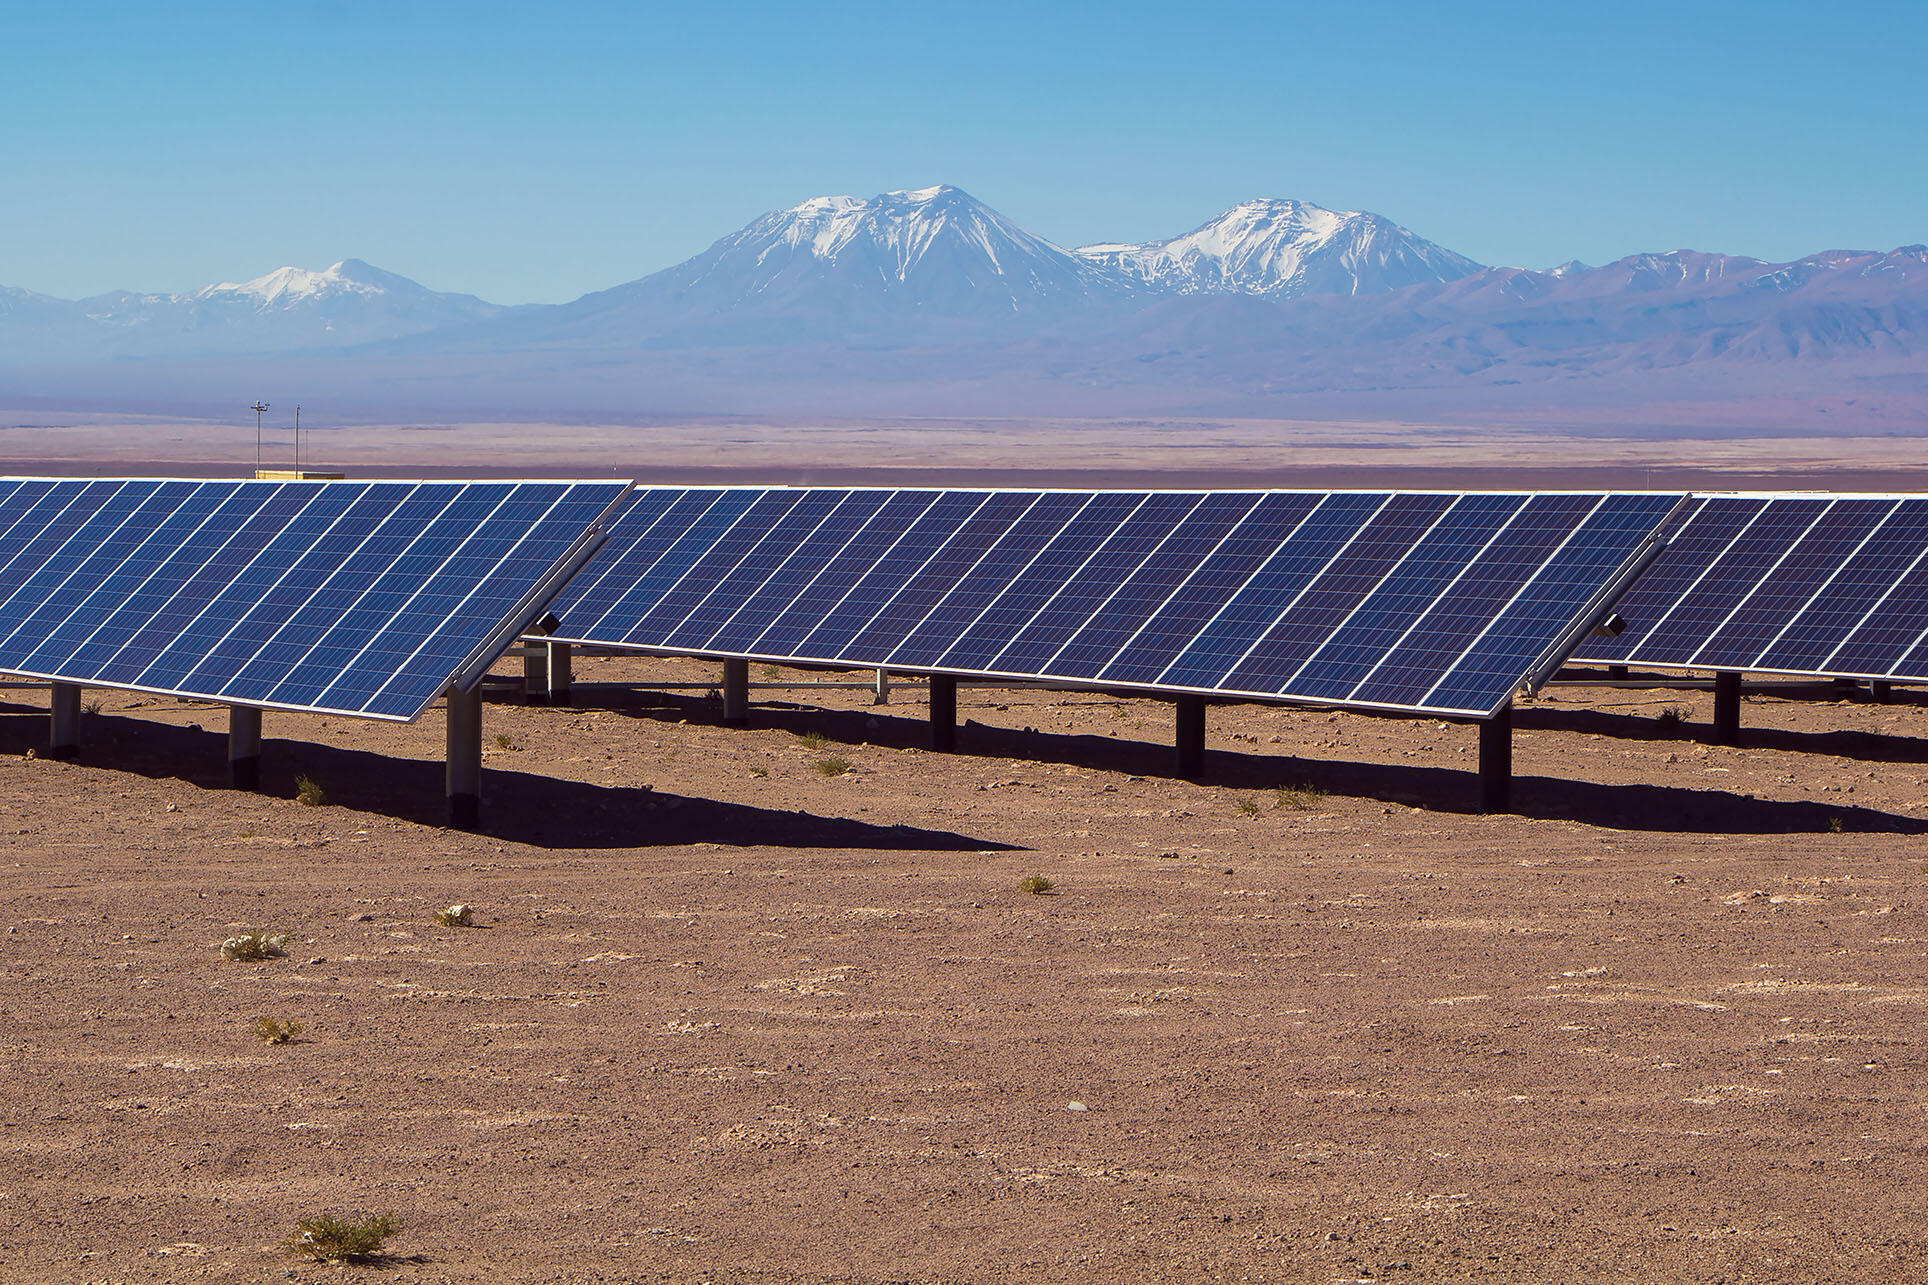 Solar panels in the Atacama Desert, Chile. (Photo by obscur/Shutterstock.com.)